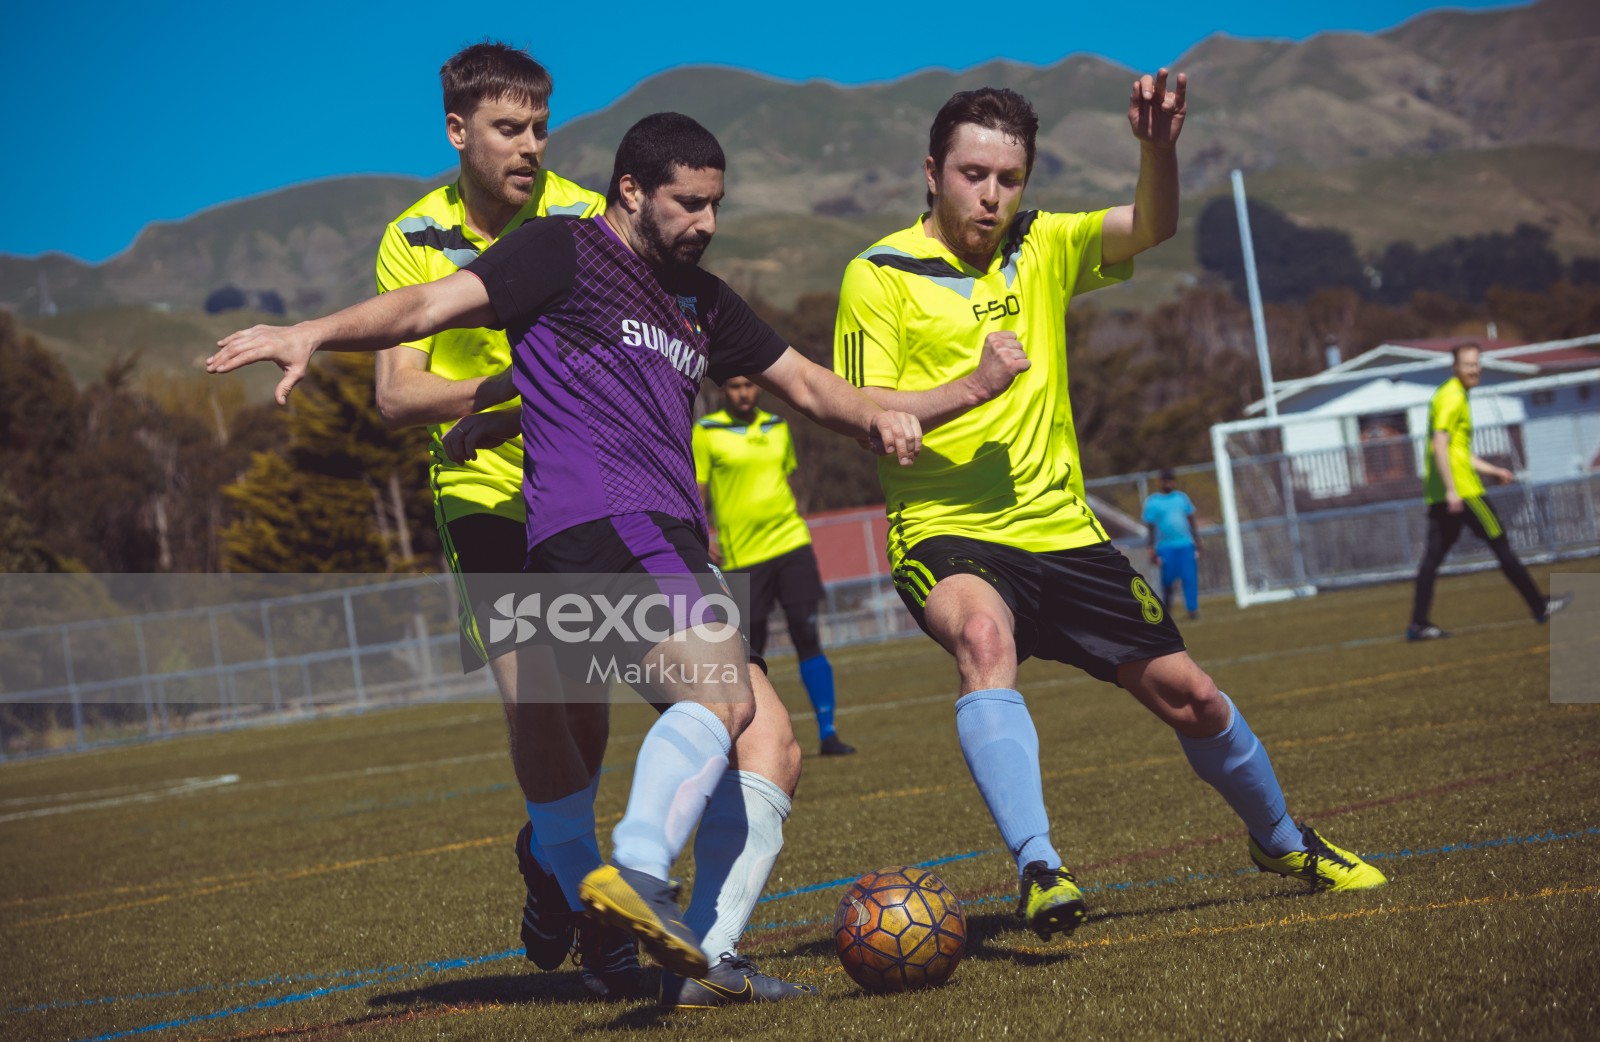 Player in purple shirt defend tackle from two opponents - Sports Zone sunday league